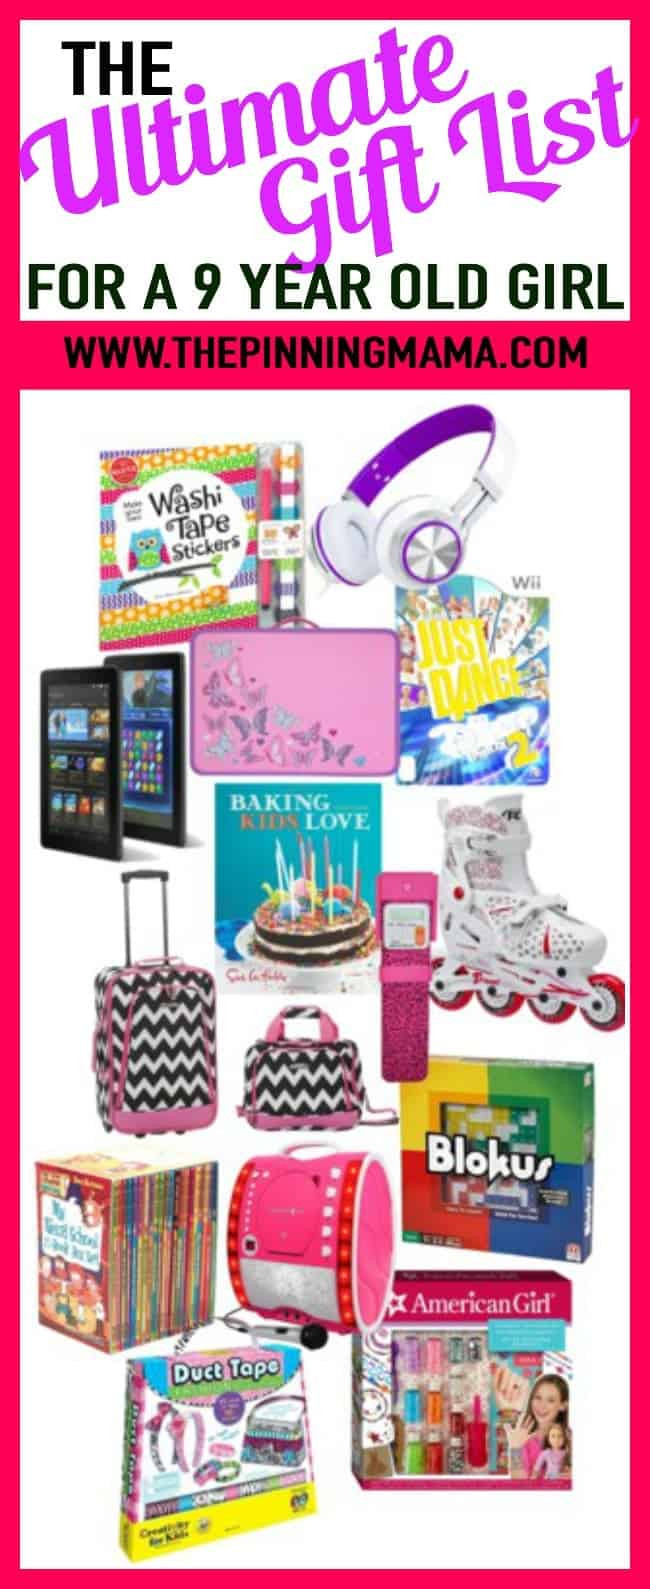 Gift Ideas For 9 Year Old Girls
 The Ultimate Gift List for a 9 Year Old Girl • The Pinning